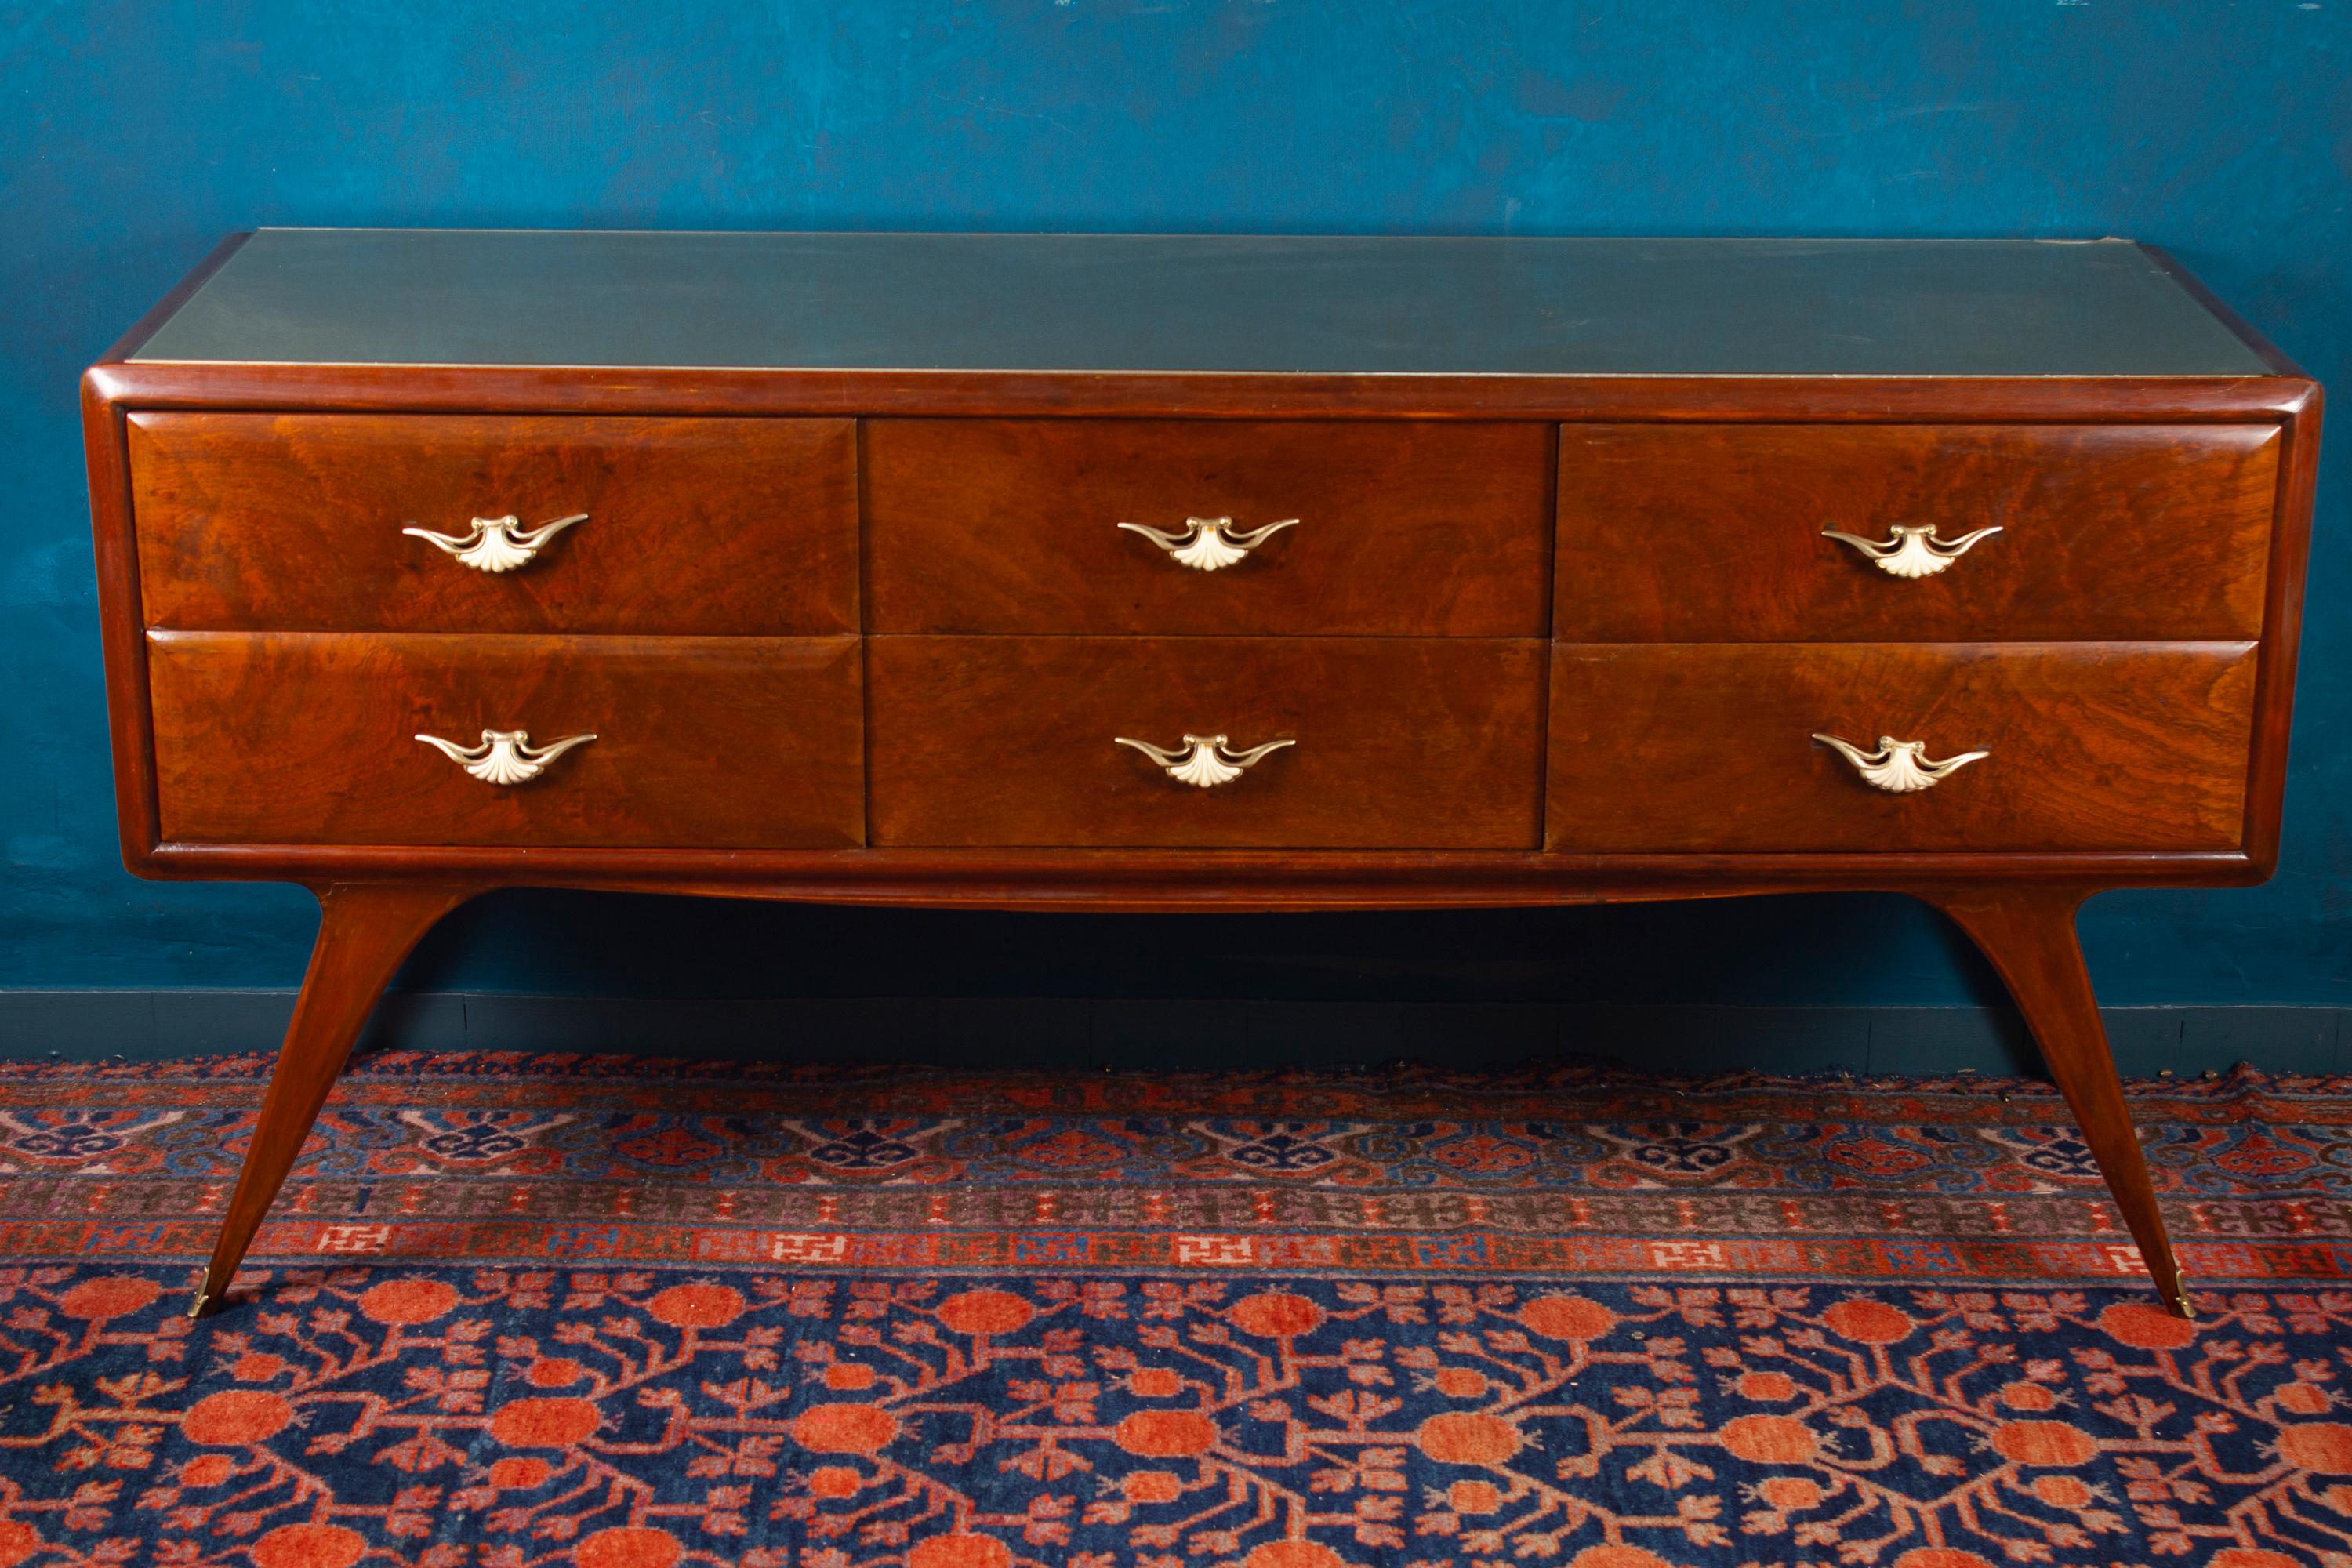 Elegant Italian mid-century mahogany commode or dresser with six drawers mounted with a grey glass shelf. Drawers decorated with brass and bone beautiful handles.